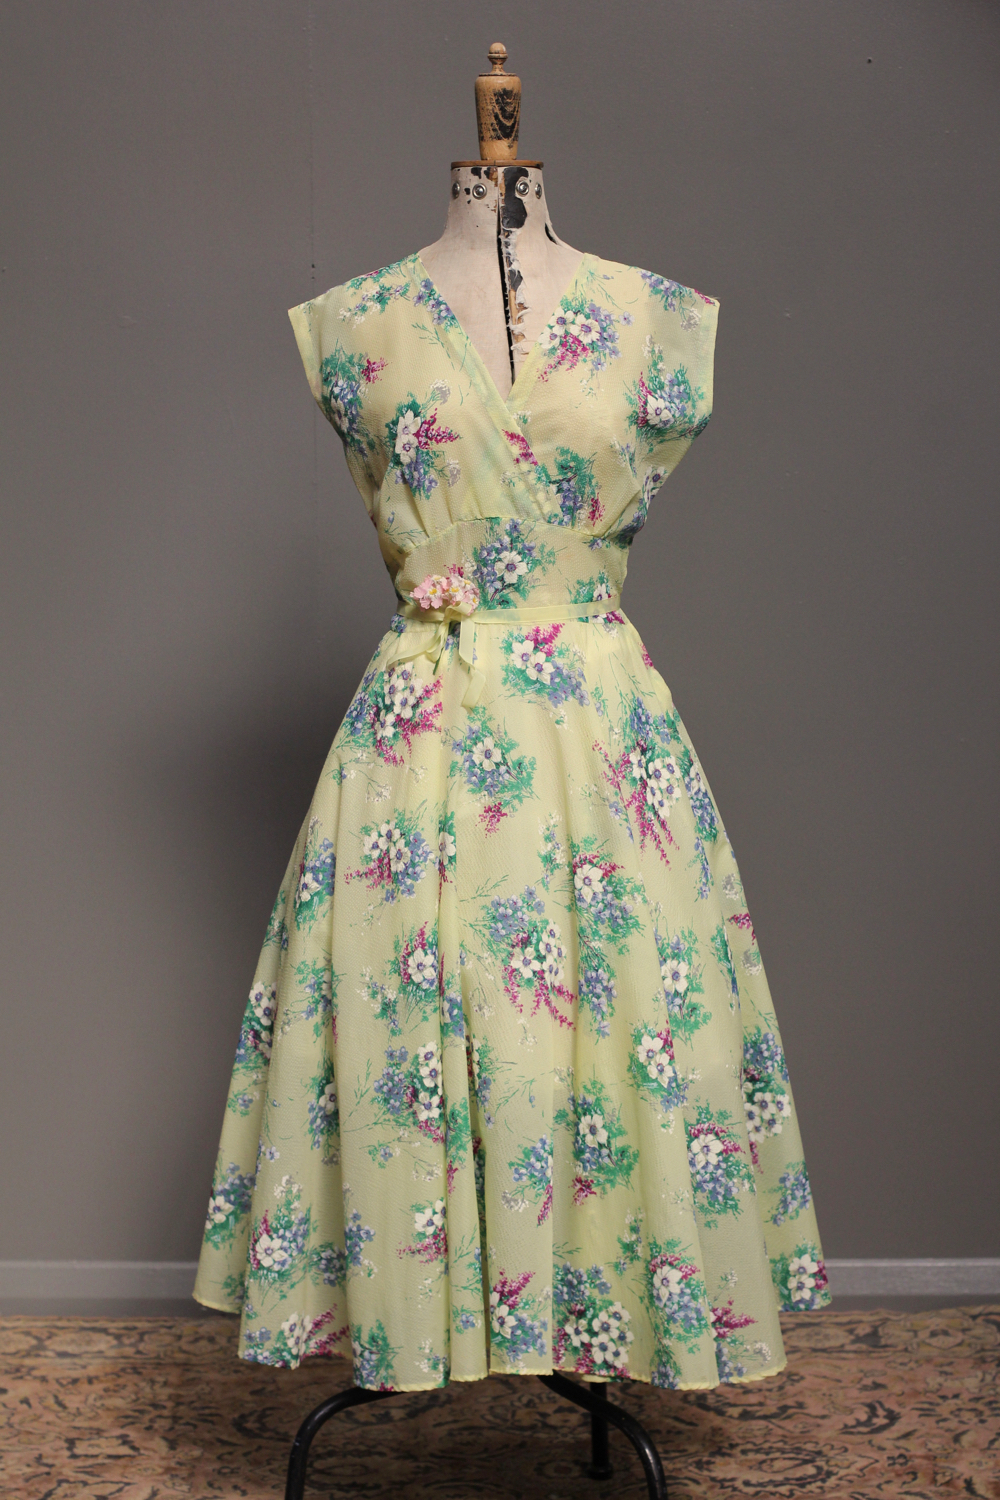 Angelic Floral Summer 1950s Dress. Size 10 145.00 Sold